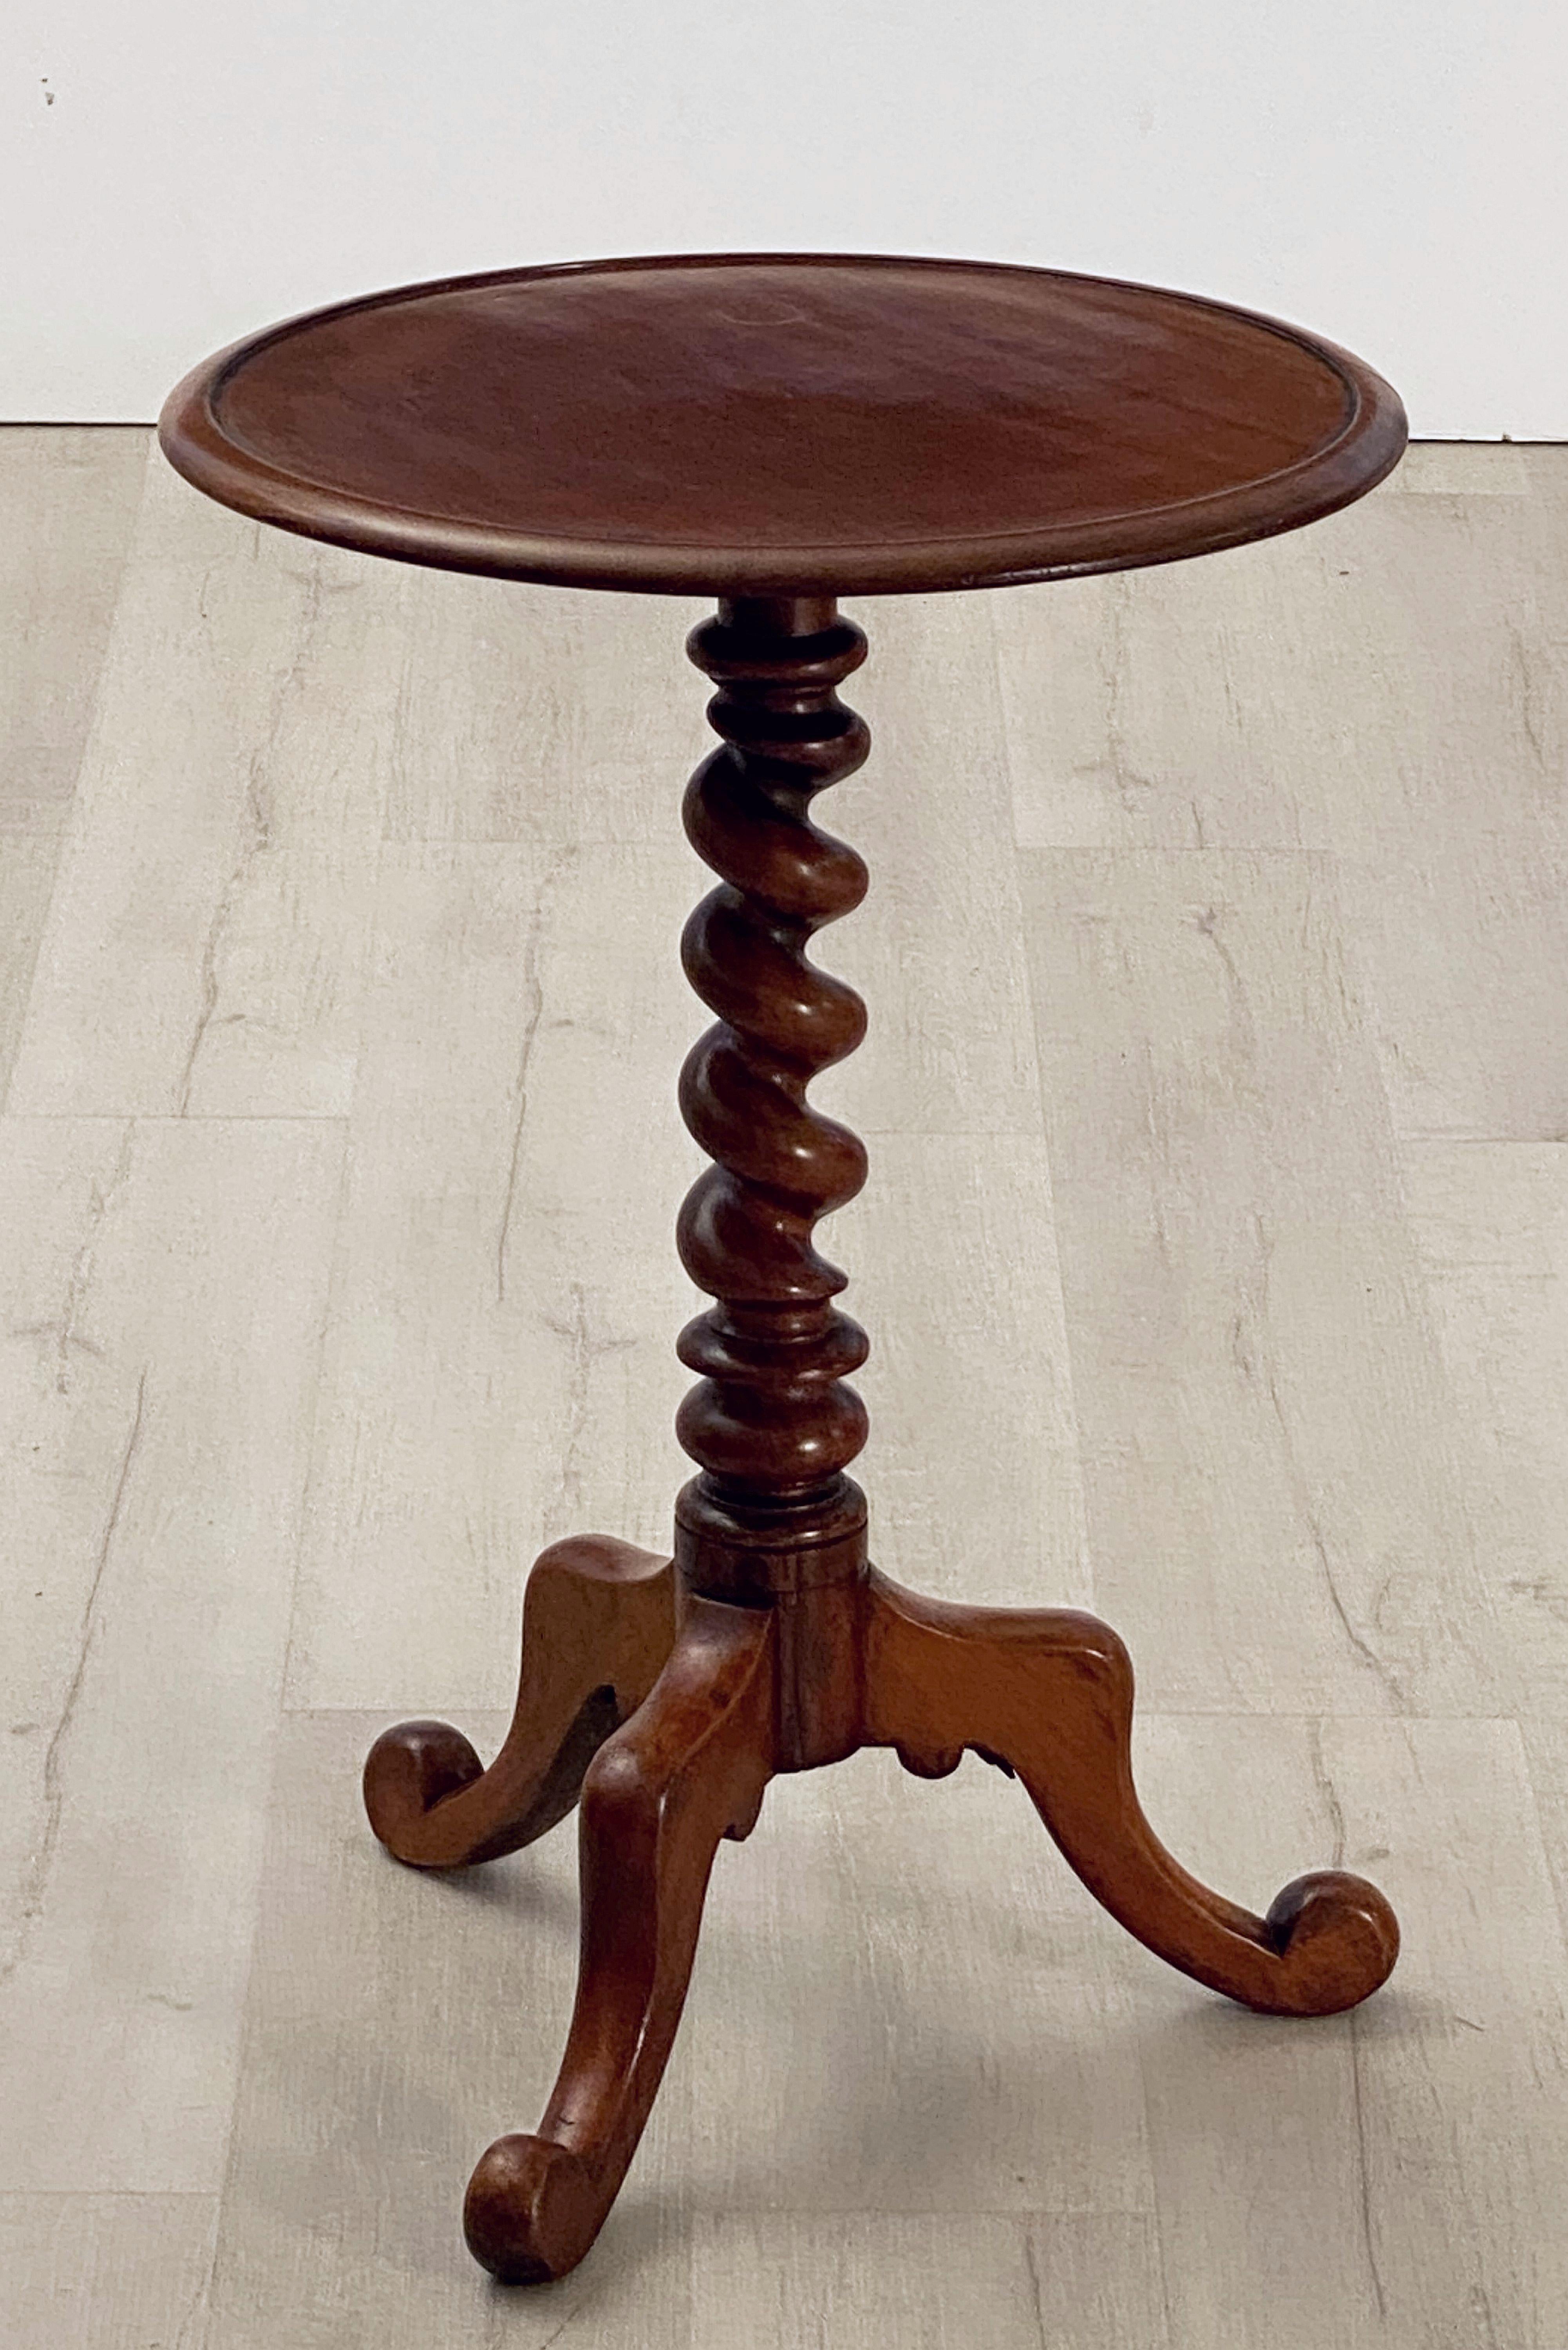 A fine English wine or drinks table of mahogany, featuring a round or circular top over barley twist stem or column with tripod legs.

Makes a great occasional or side table for a chair or sofa.
  